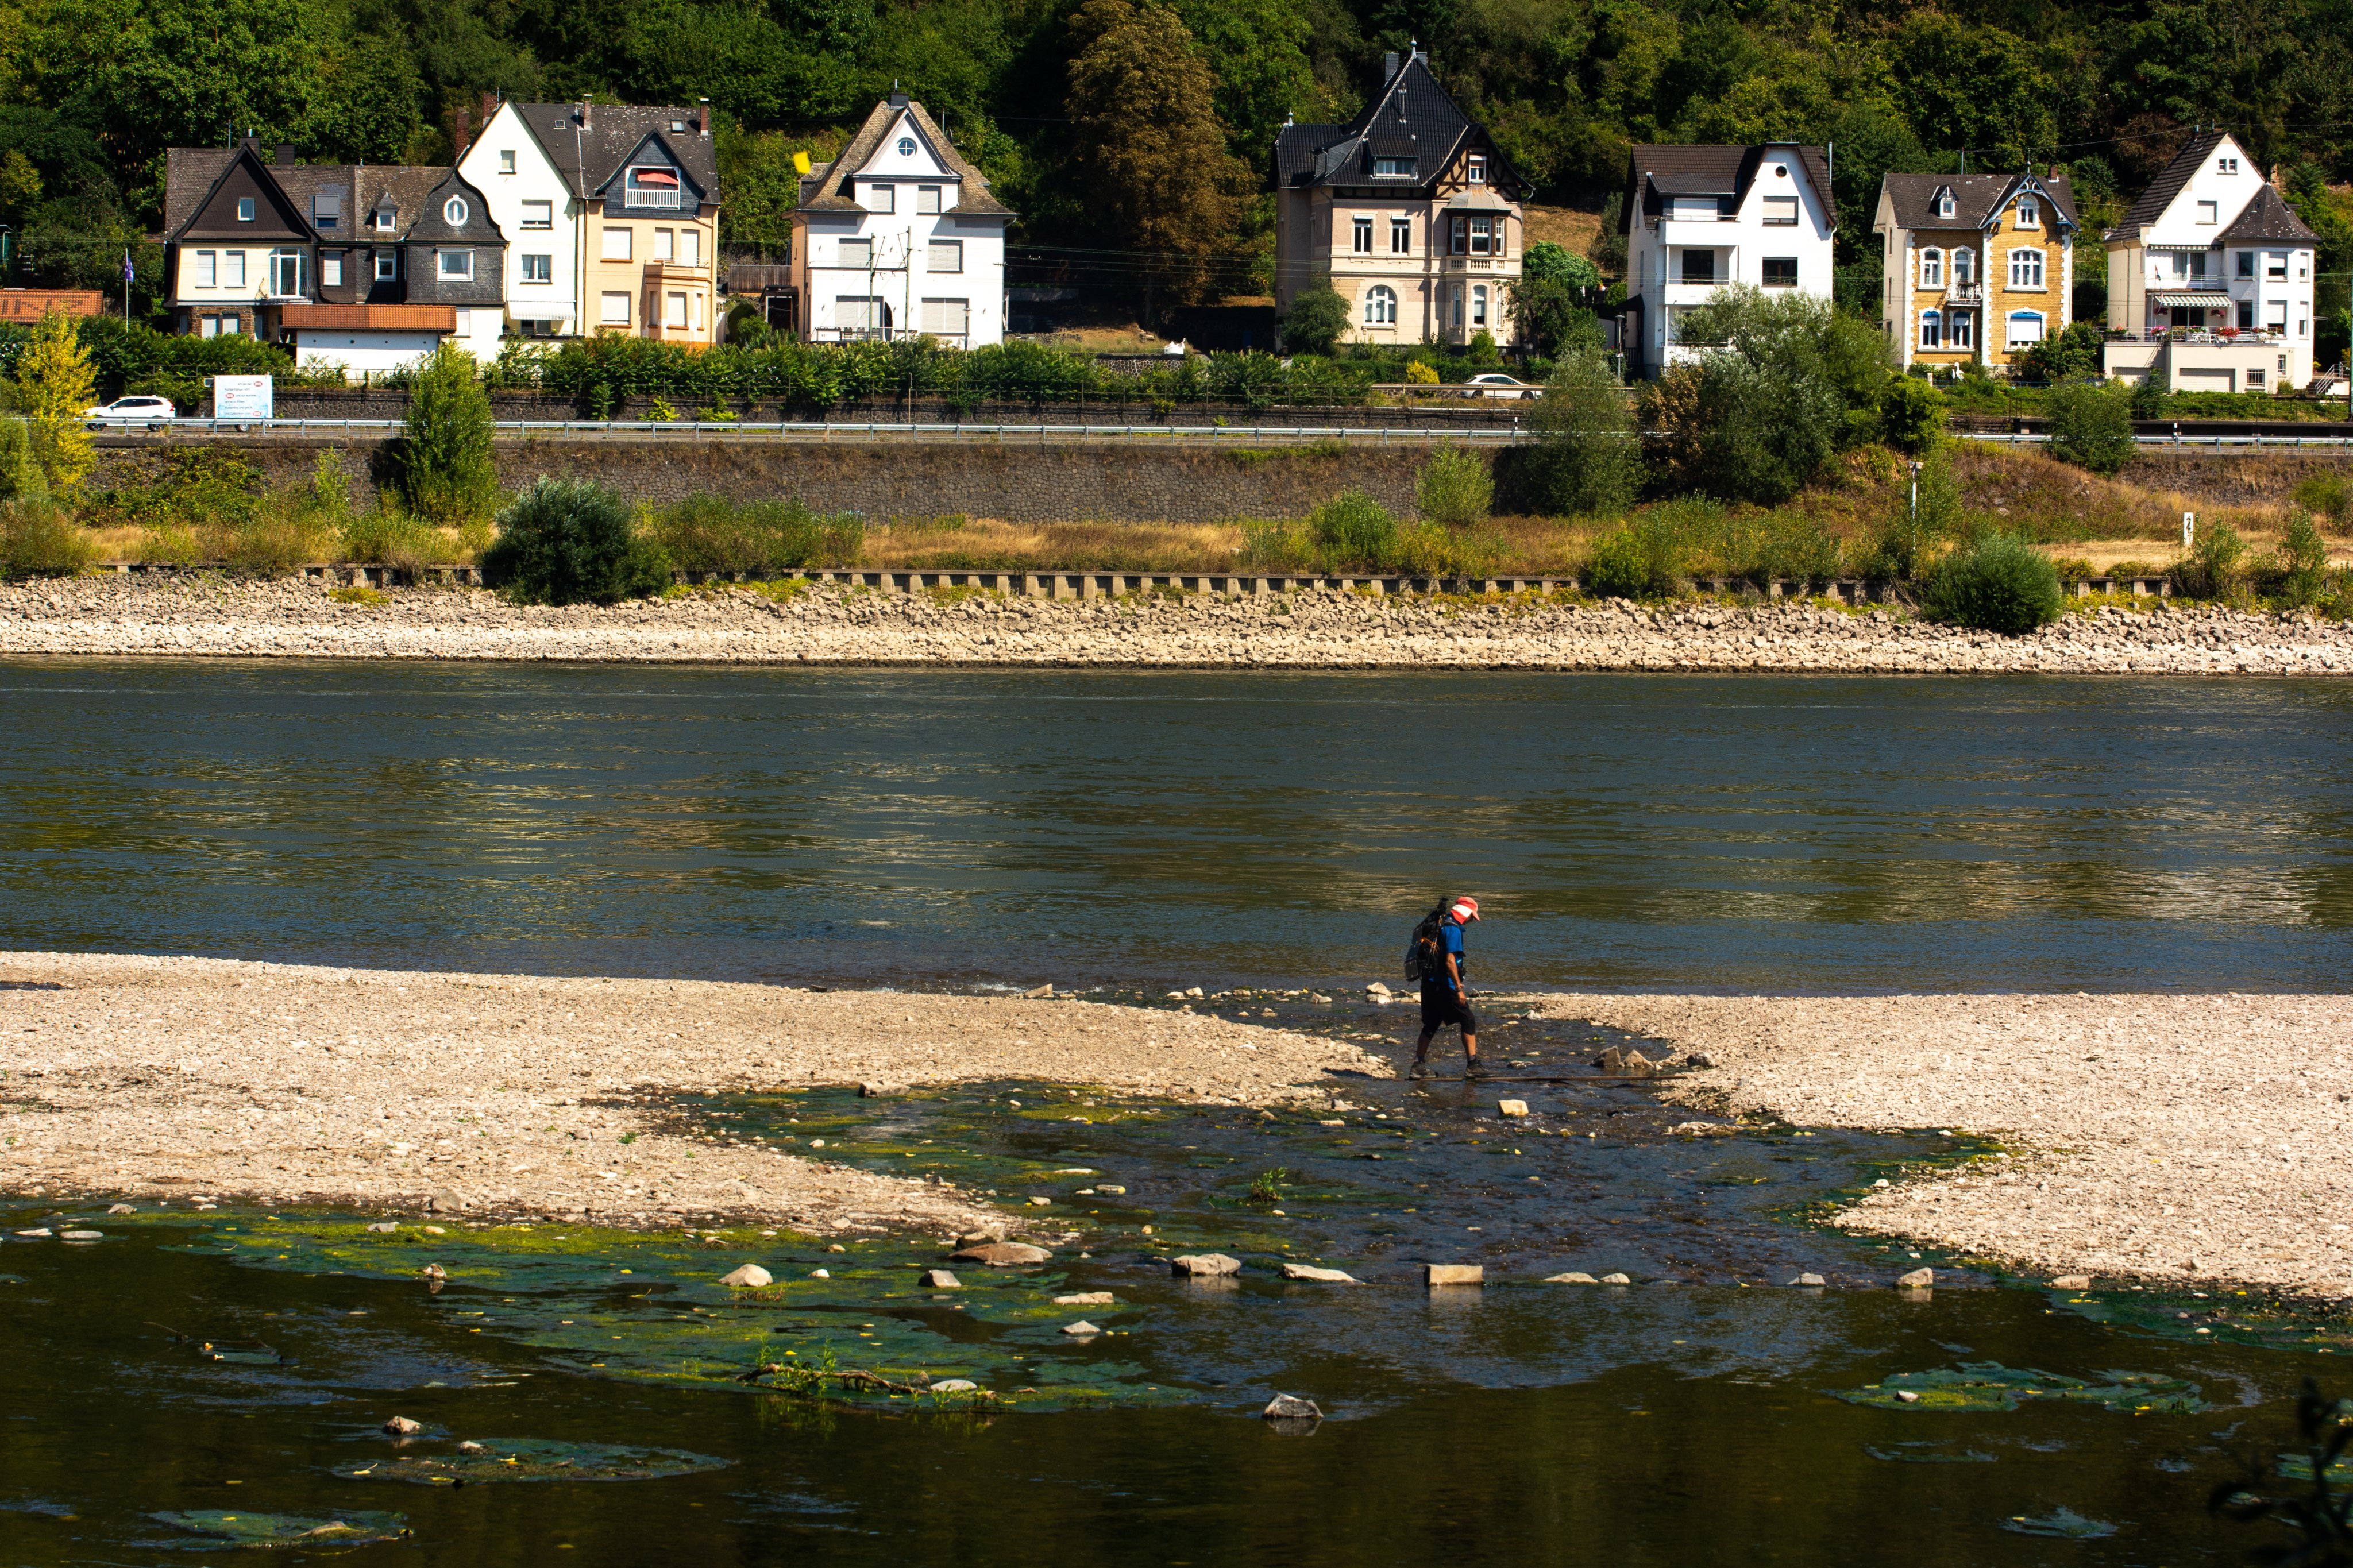 Low Water Levels Continues On The Rhine River In Sinzig